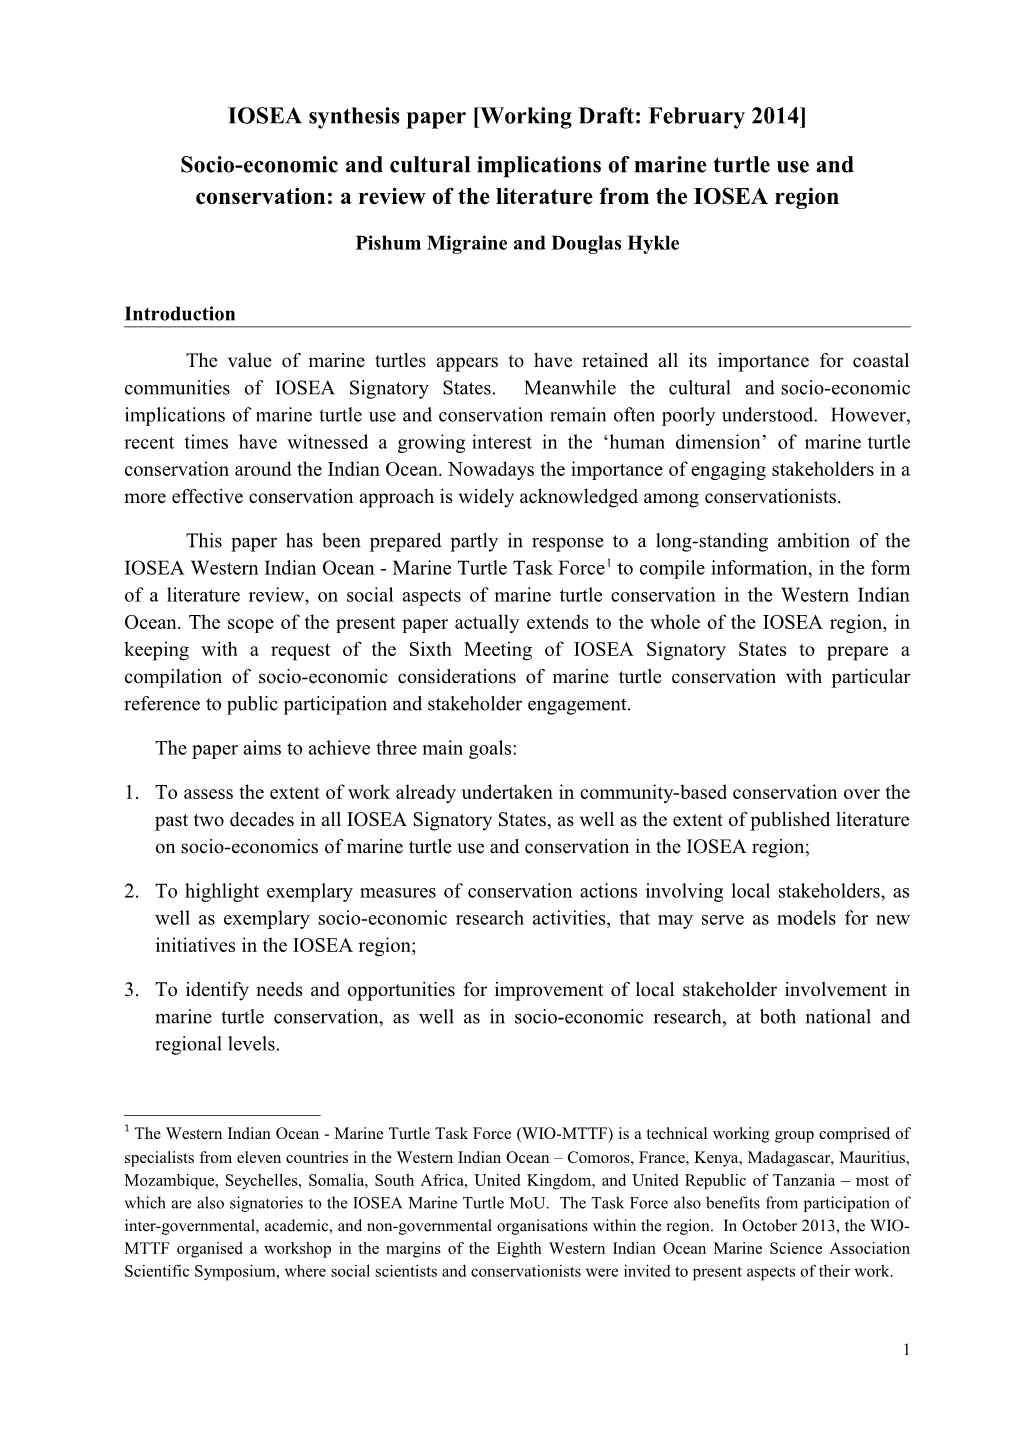 IOSEA Synthesis Paper Working Draft: February 2014